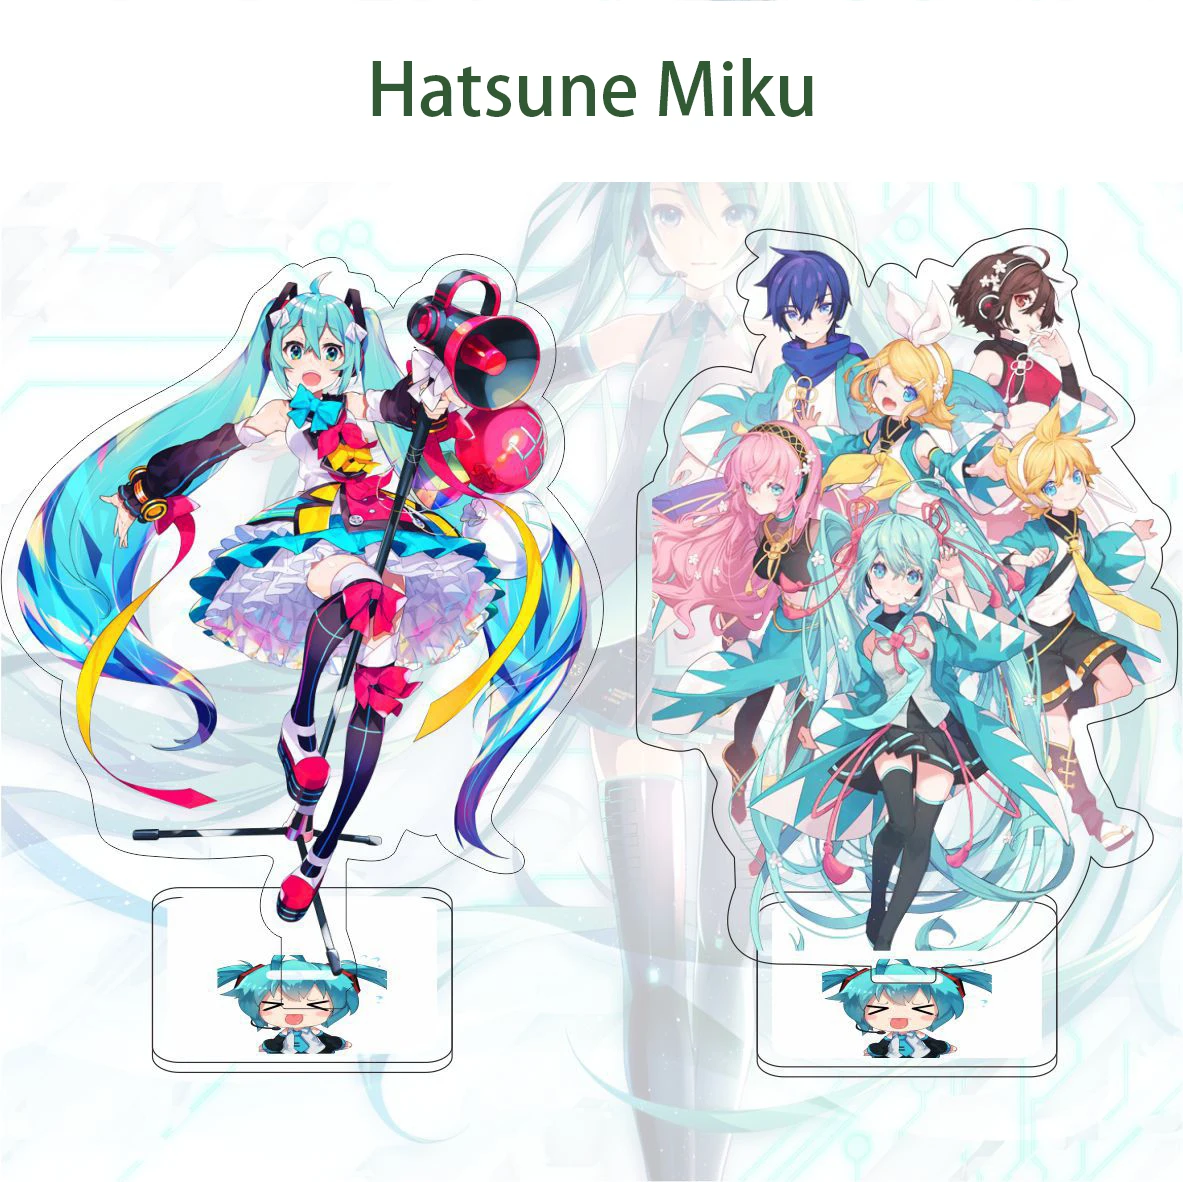 

15Cm Hatsune Miku Figure Acrylic Stand Model New Anime Girls Toys Desktop Ornaments Exquisite Collection Toys Friend Gift